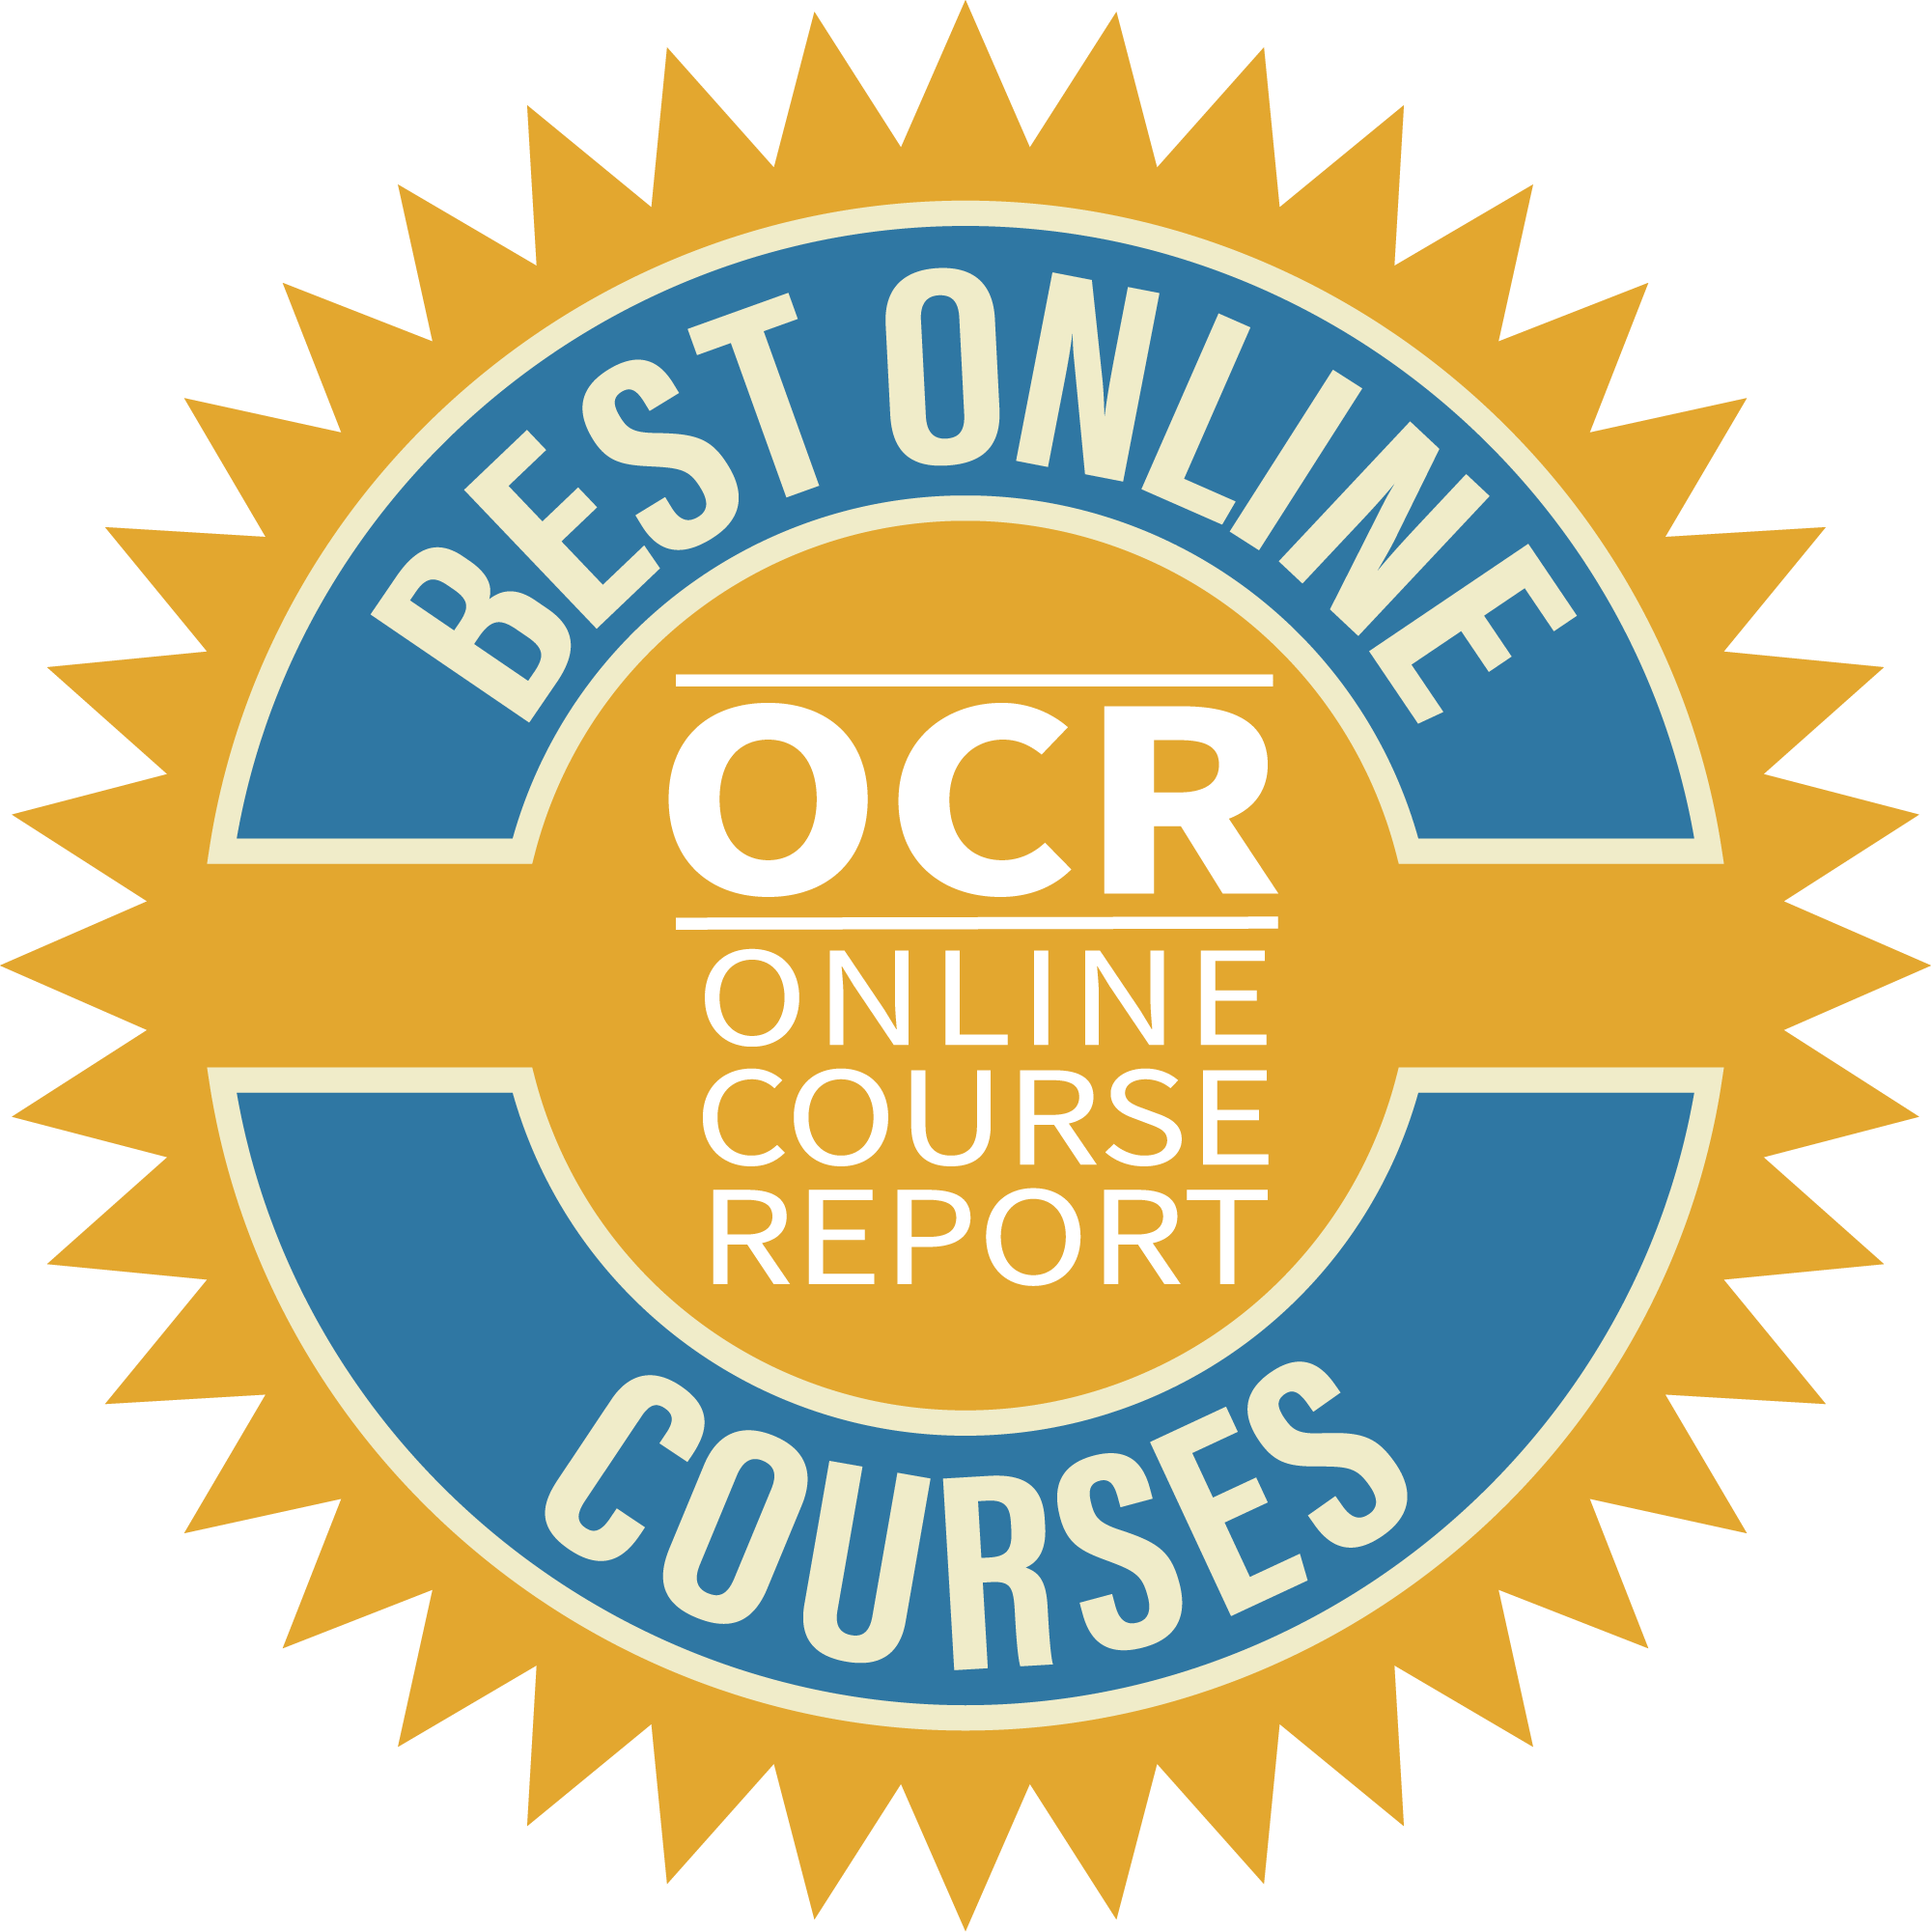 7000+ OpenCourseWare Courses from Top Institutions — Class Central